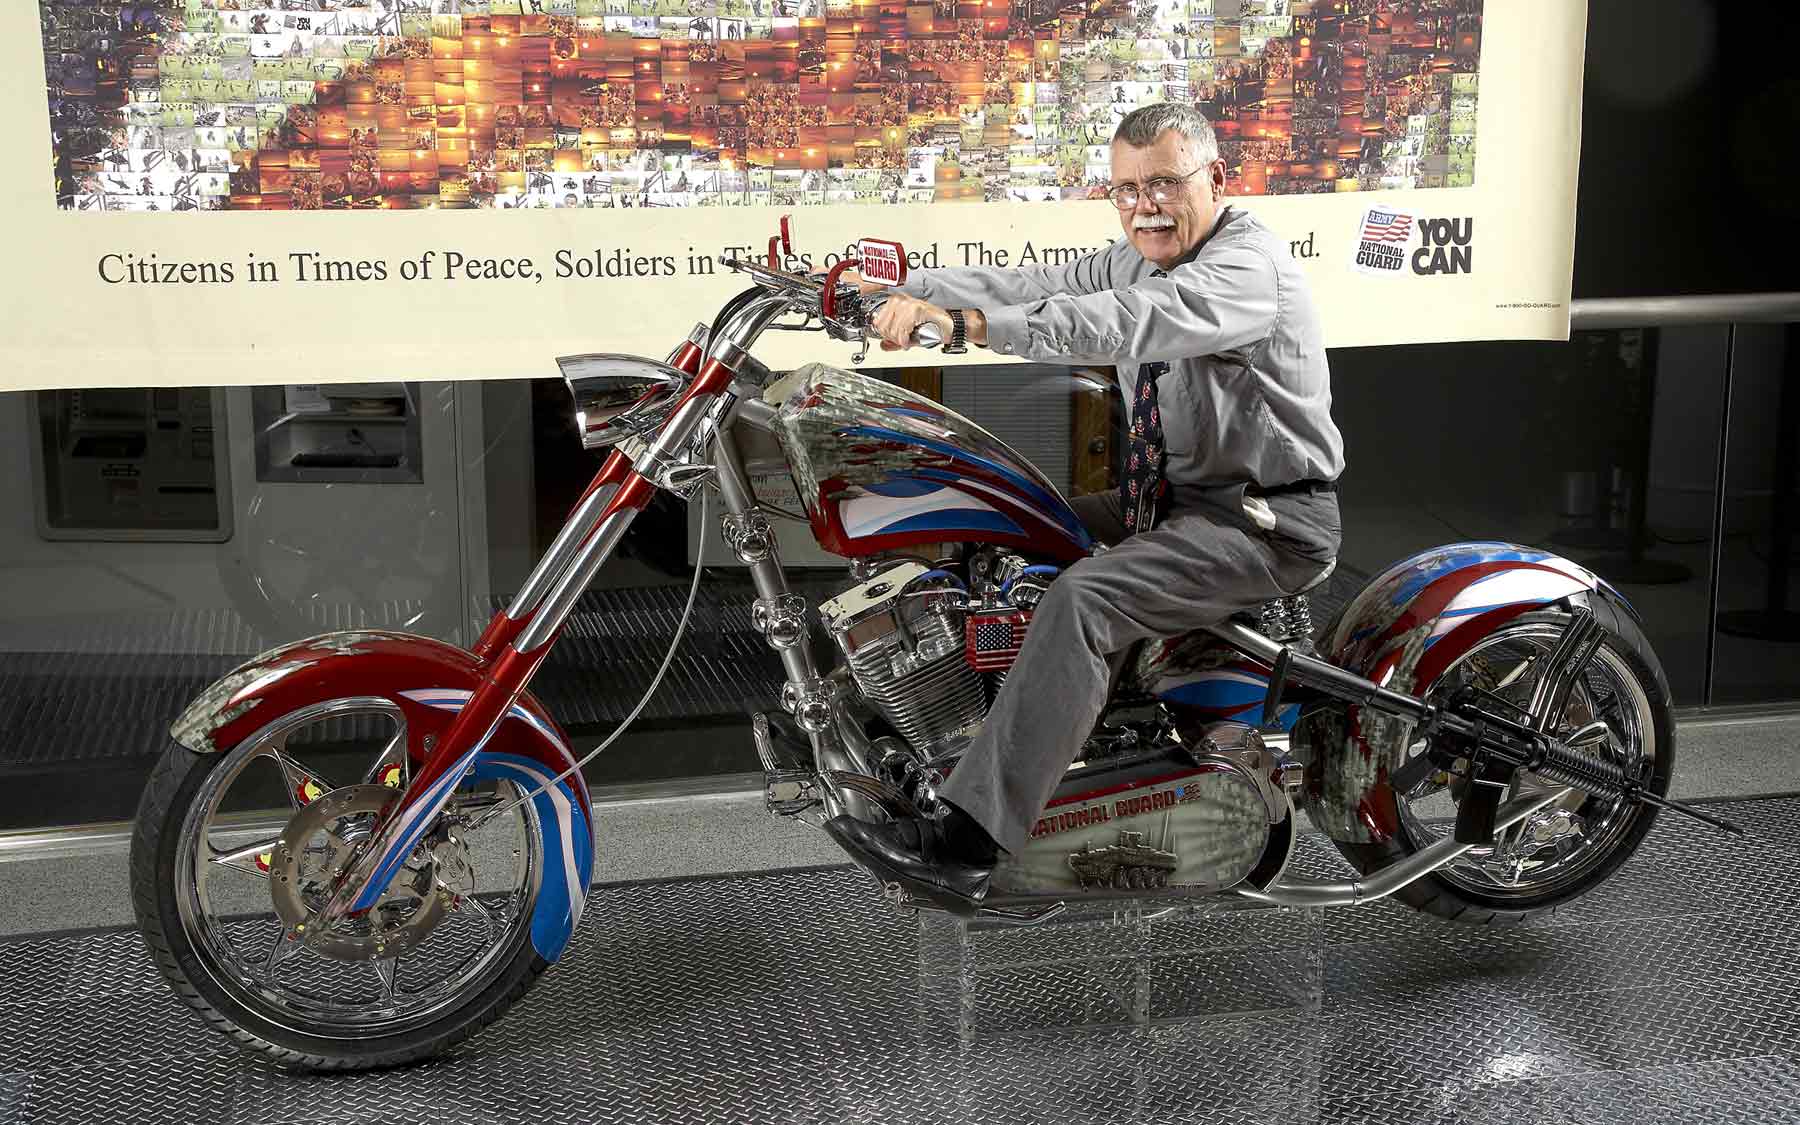 Jack Espinal on the Guard's Patriot Chopper